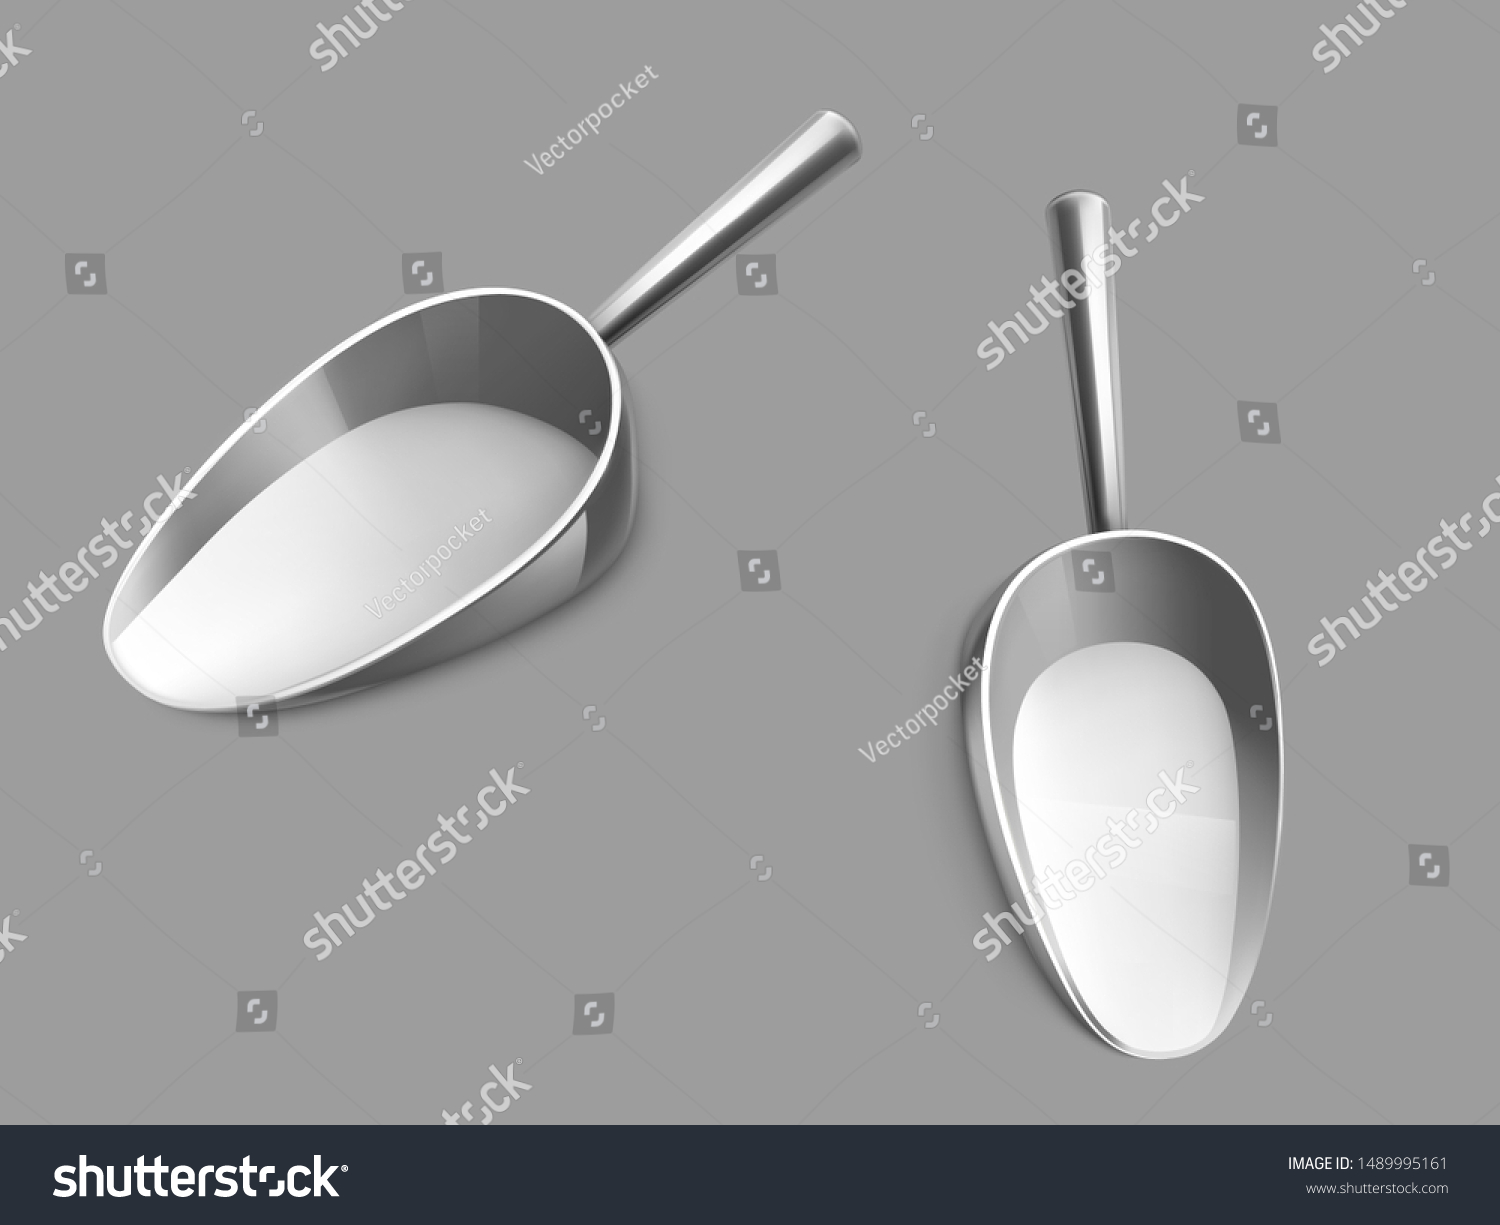 SVG of Metallic or stainless steel scoop with glossy chrome handle side, top view 3d realistic vector isolated on grey background. Kitchen utensil, grocery store tool for bulk goods filling illustration svg